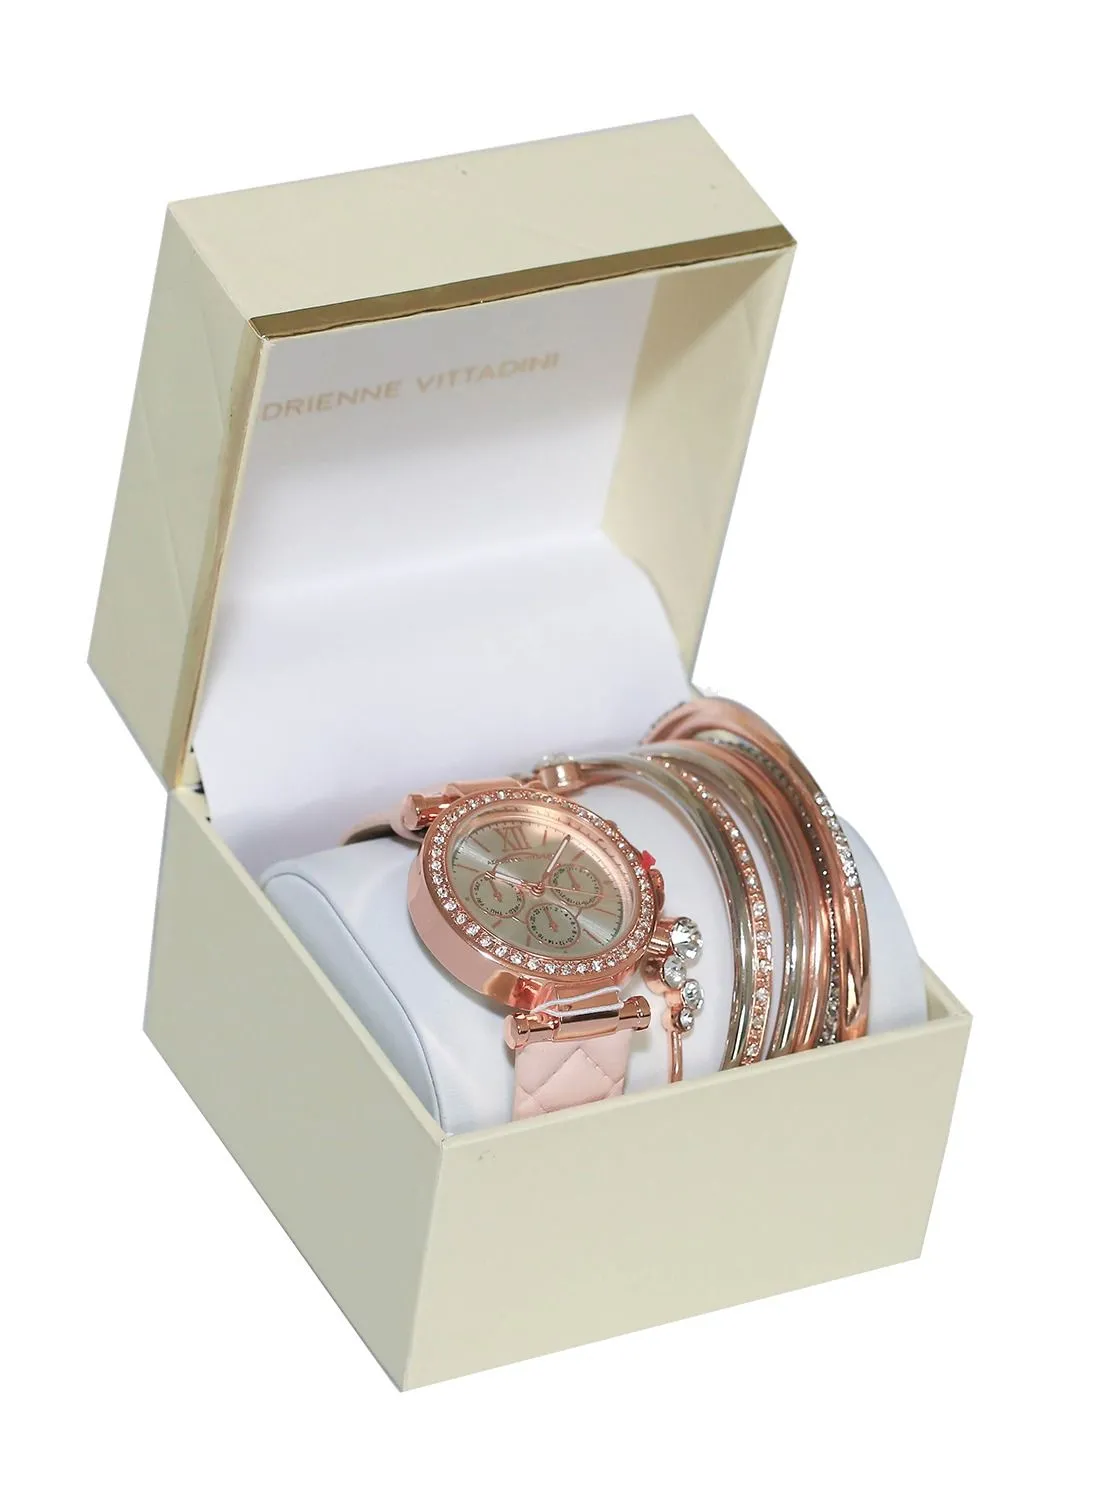 ADRIENNE VITTADINI Ladies Analog Watch Rose Gold Case with Crystals Dial Blush Pink Leather Strap